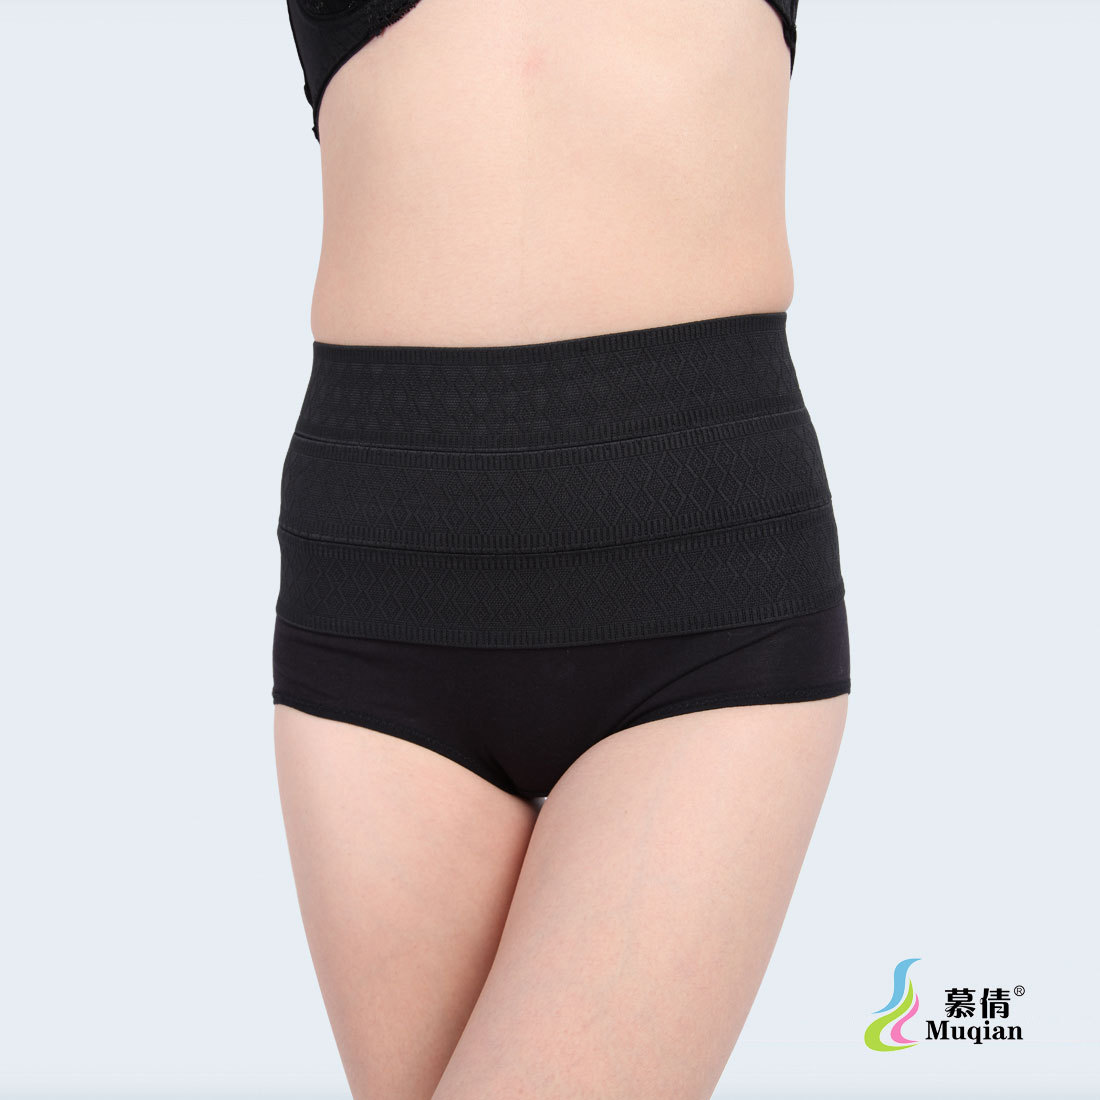 High waist abdomen belt drawing rompers cotton body shaping pants beauty care corselets pants 525